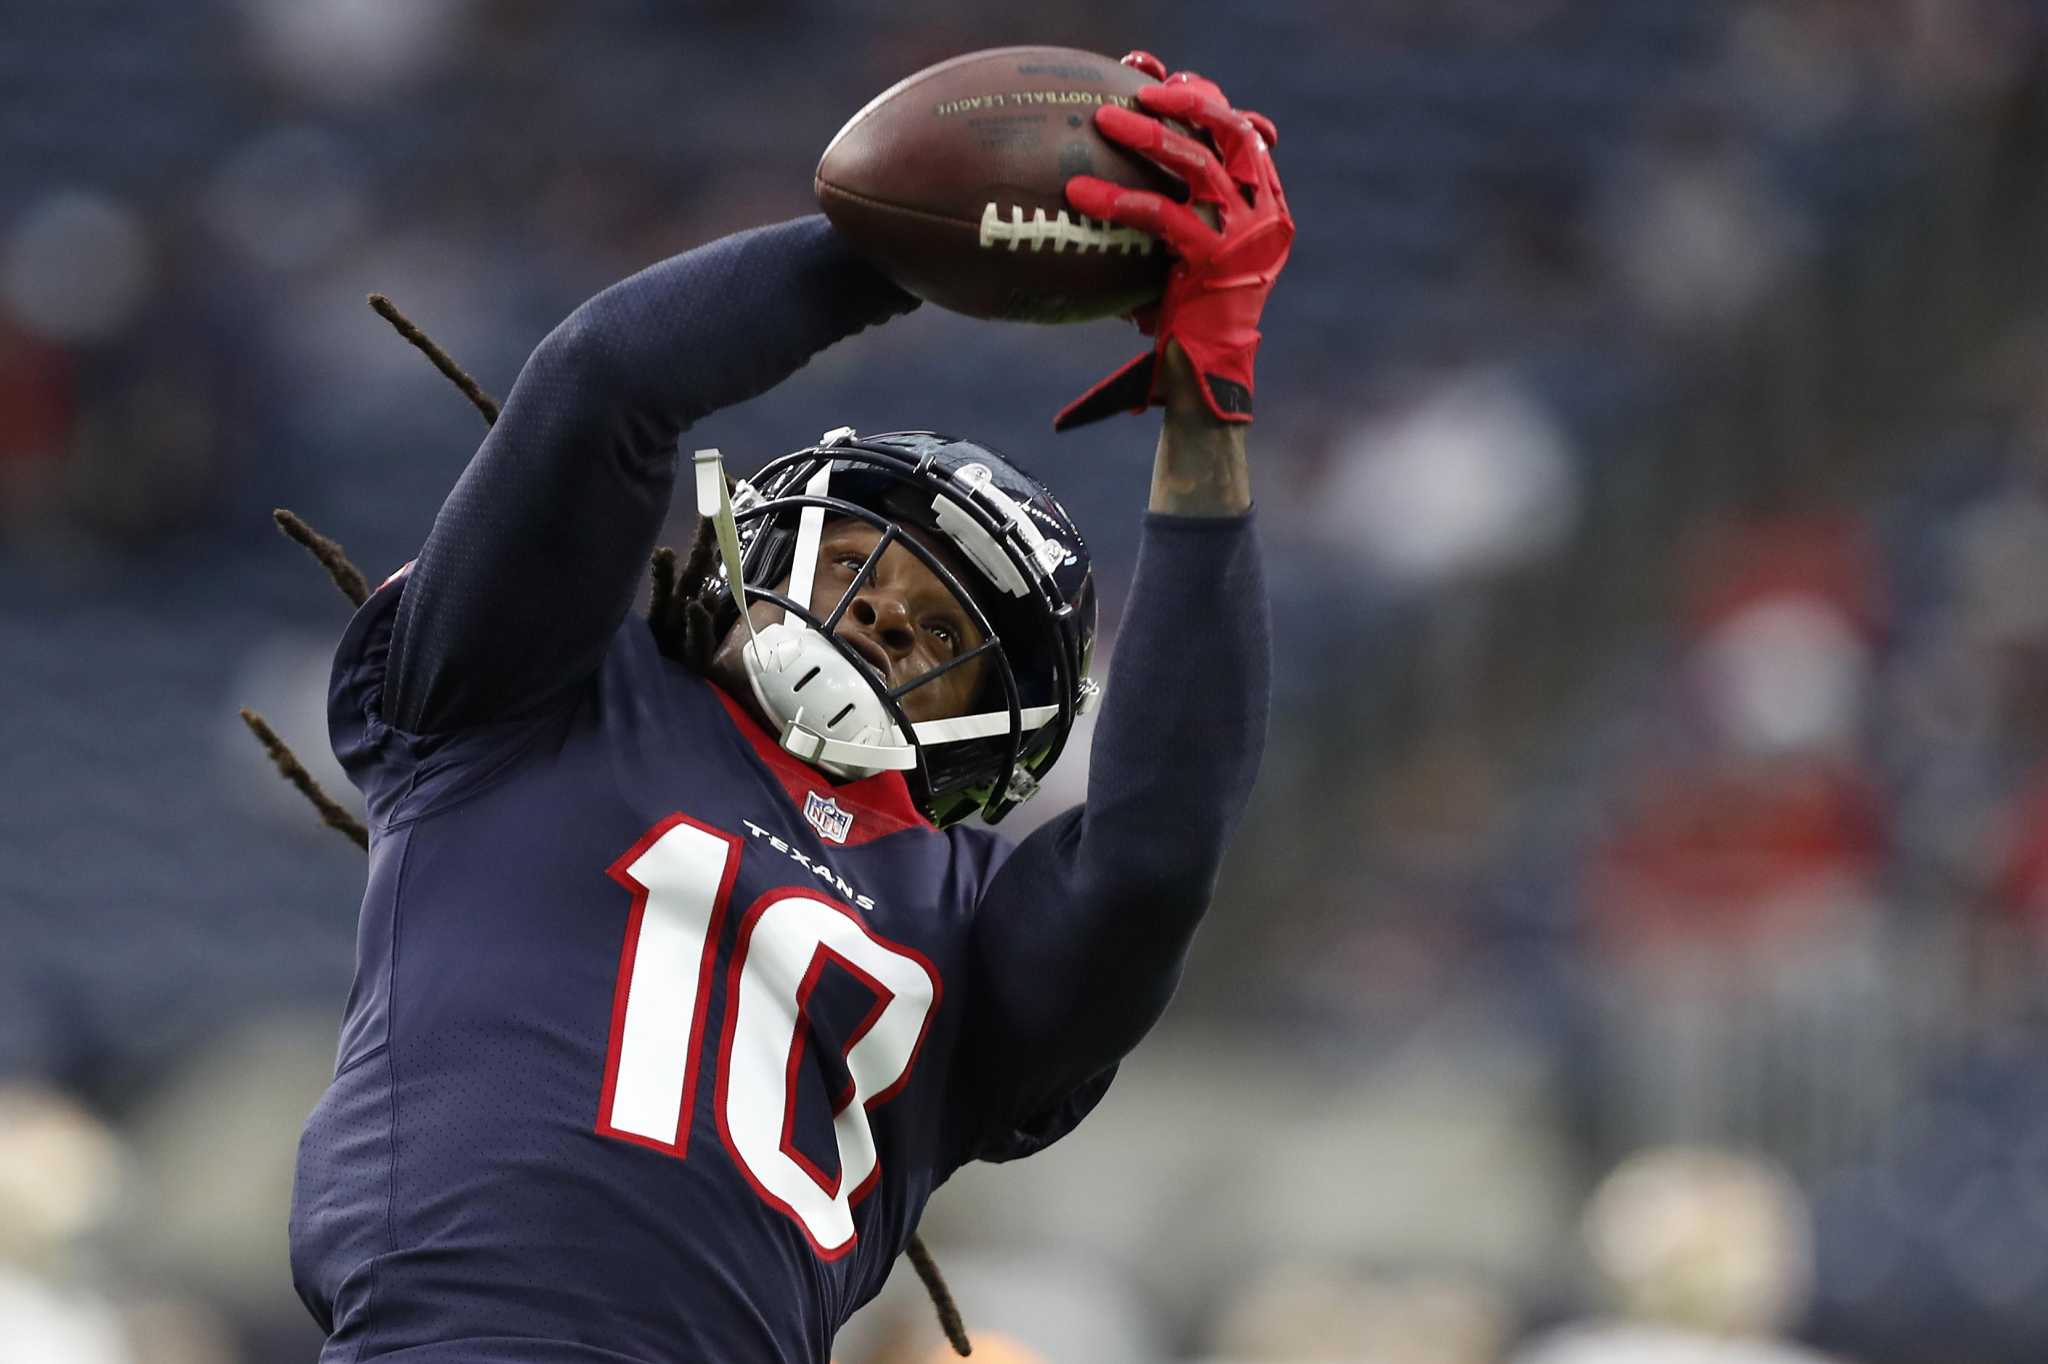 Hands down, Texans wide receiver DeAndre Hopkins one of the NFL's best